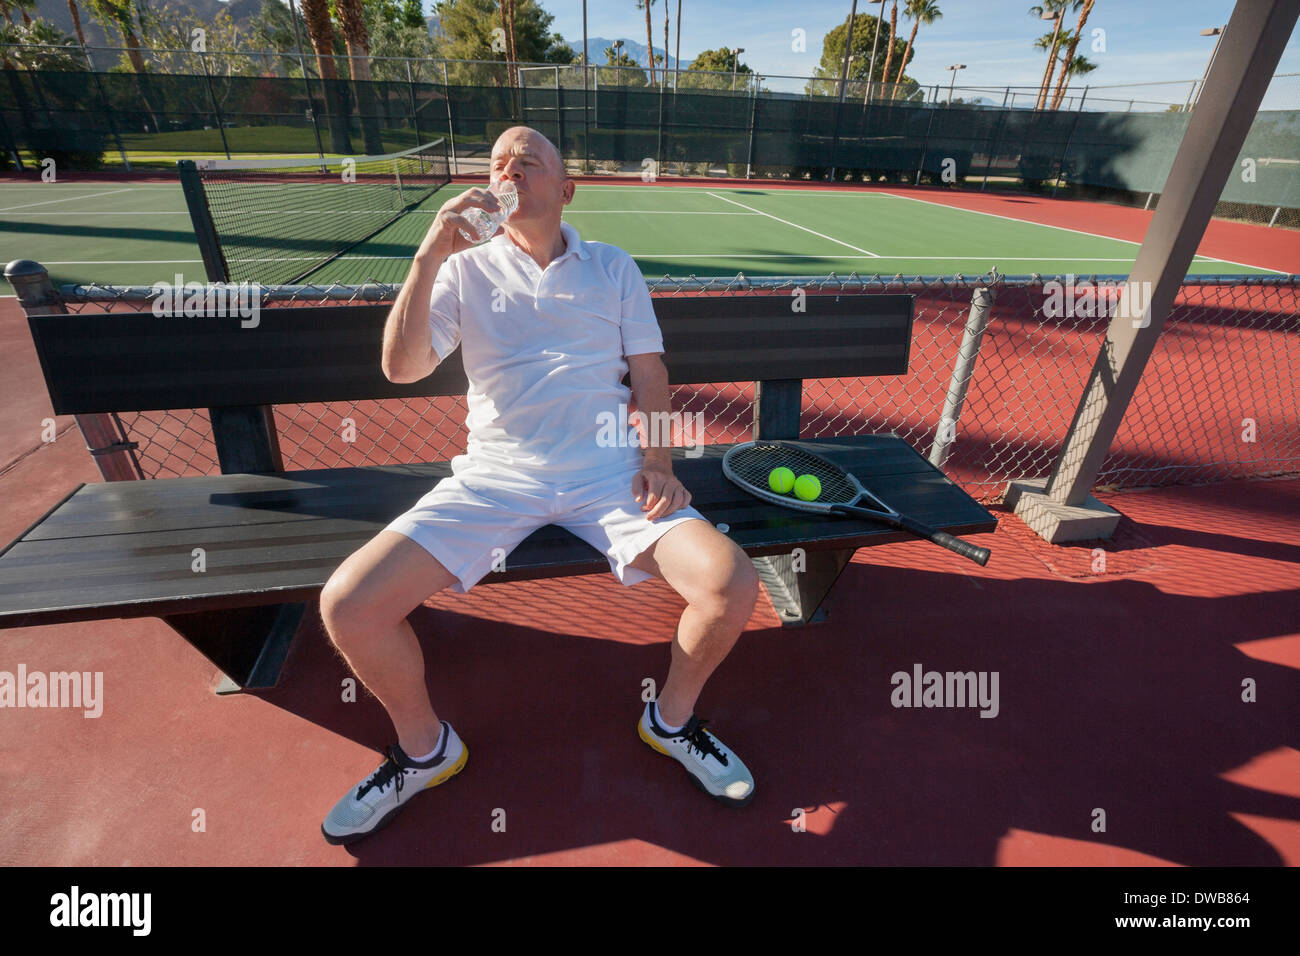 Senior male tennis player drinking water while relaxing on court Stock Photo